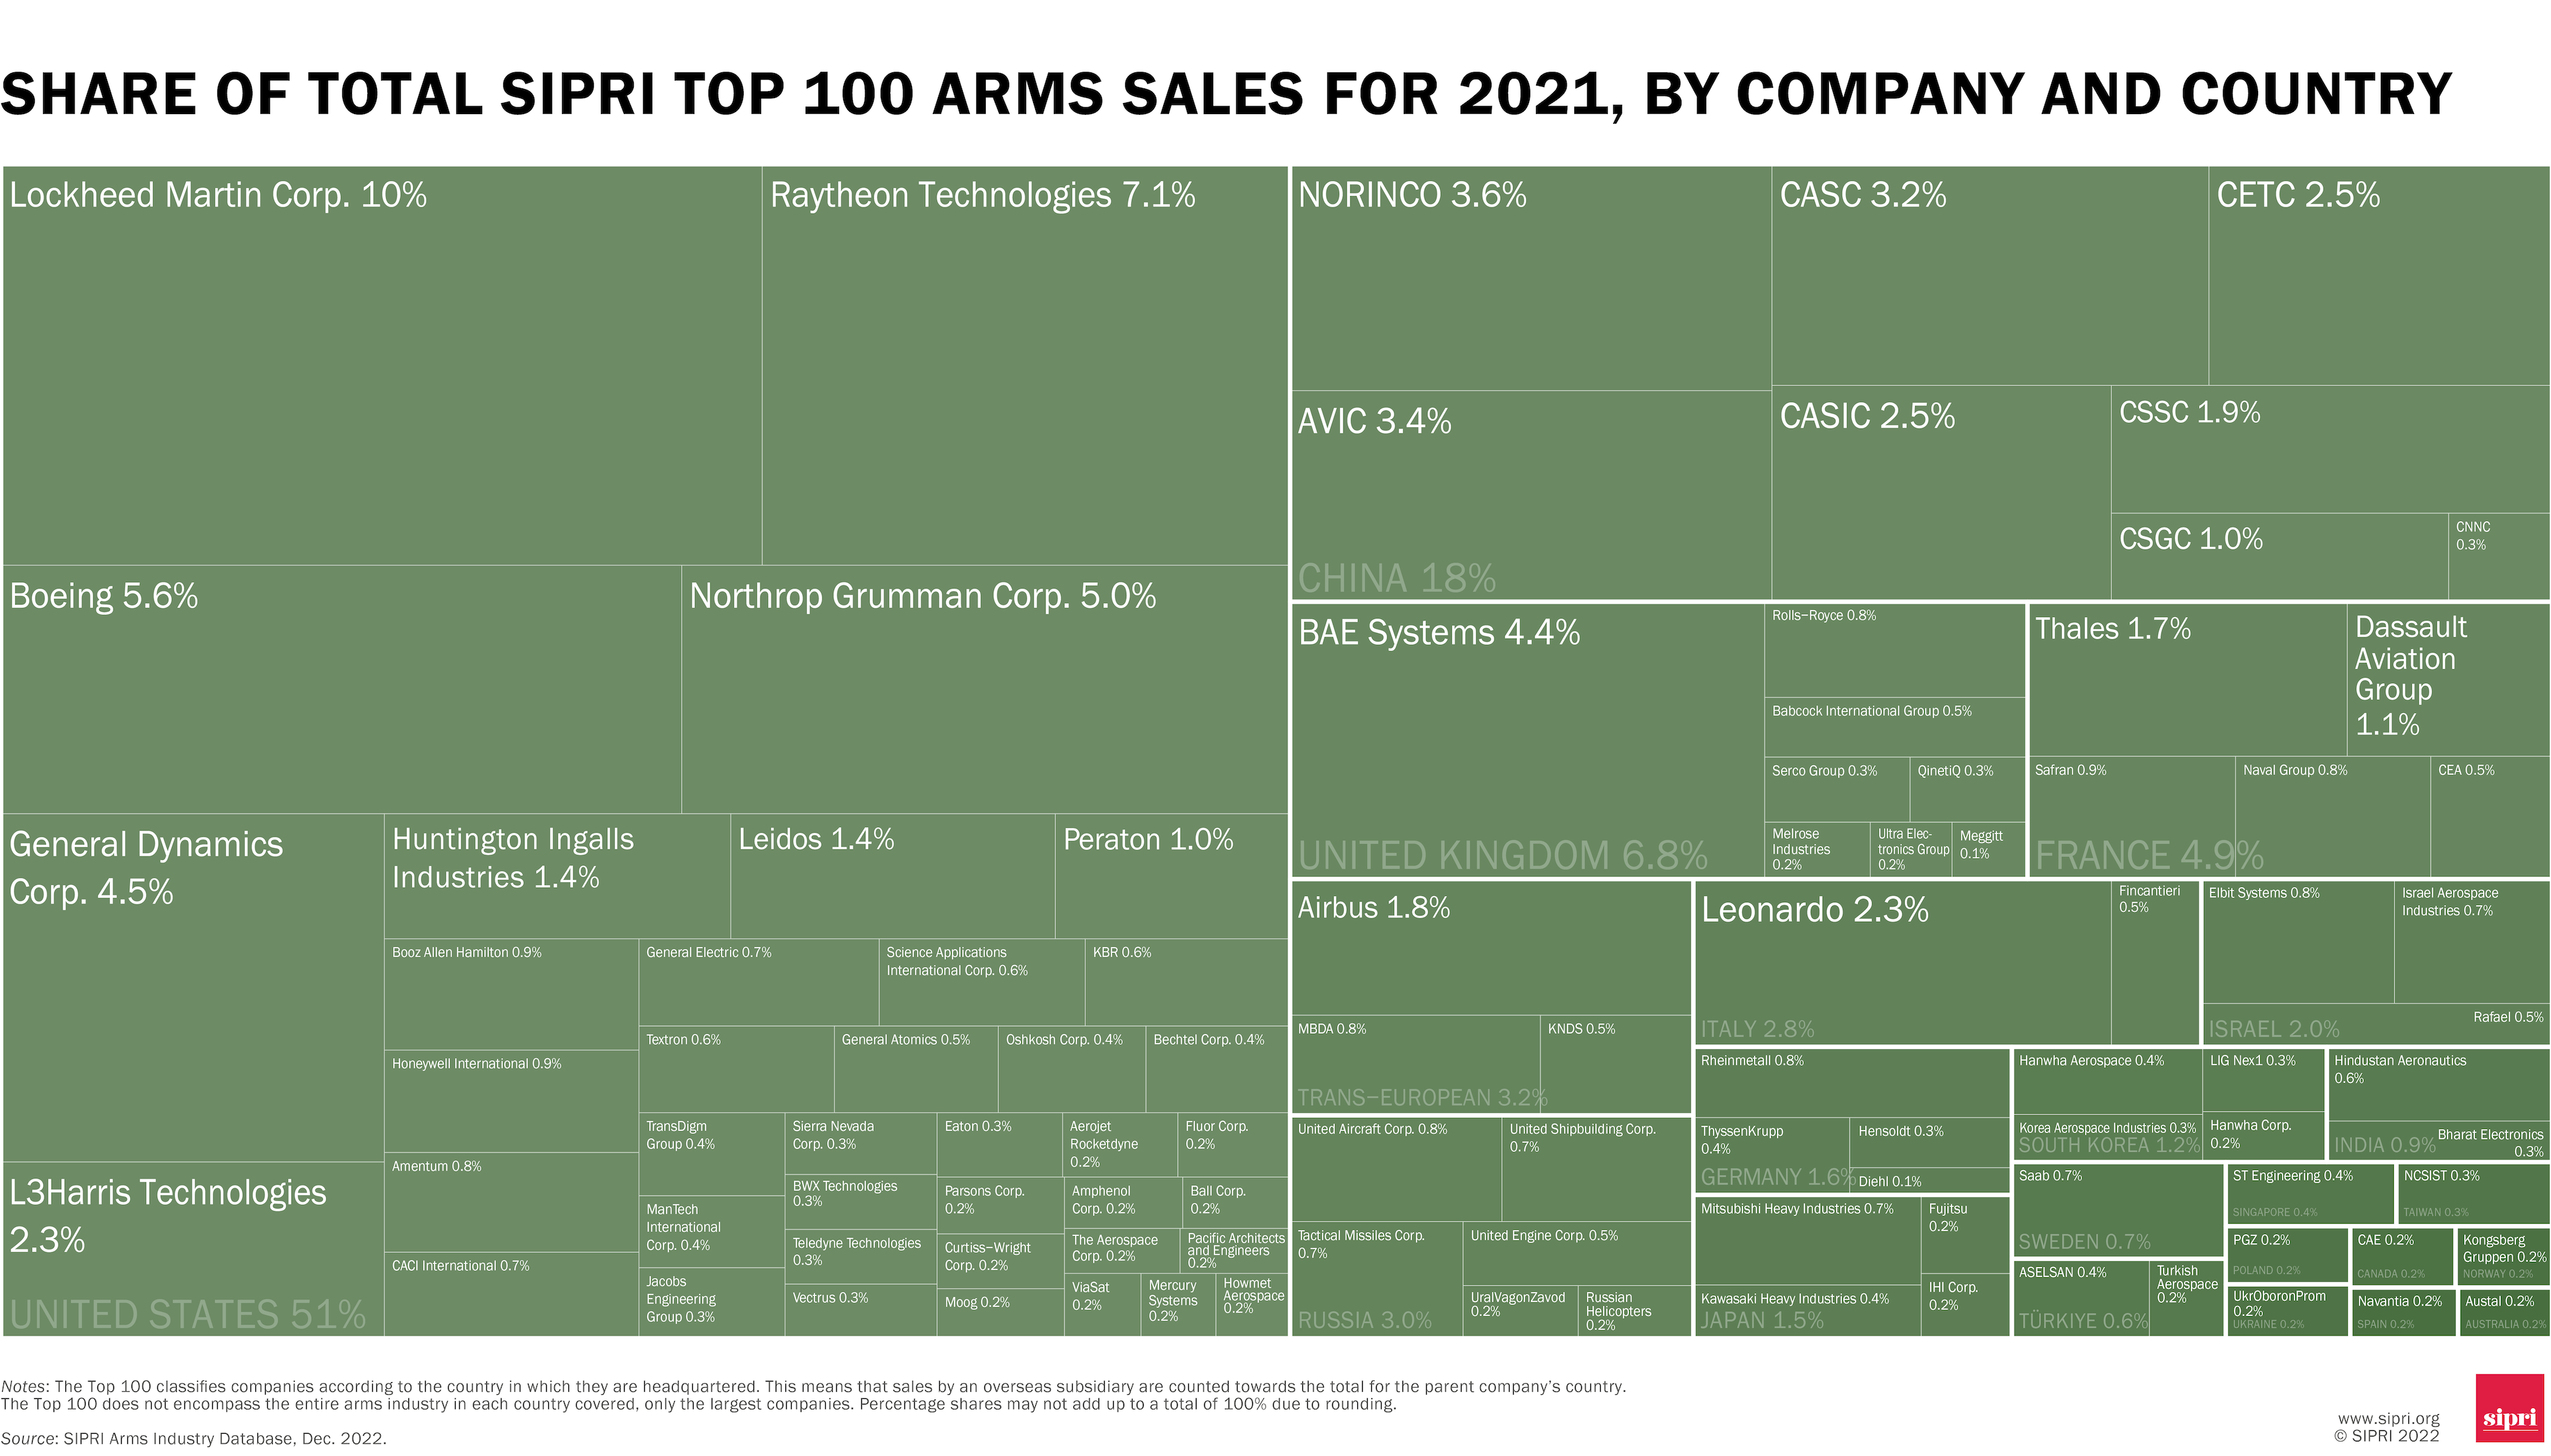 Share of total SIPRI Top 100 arms sales for 2021, by company and country